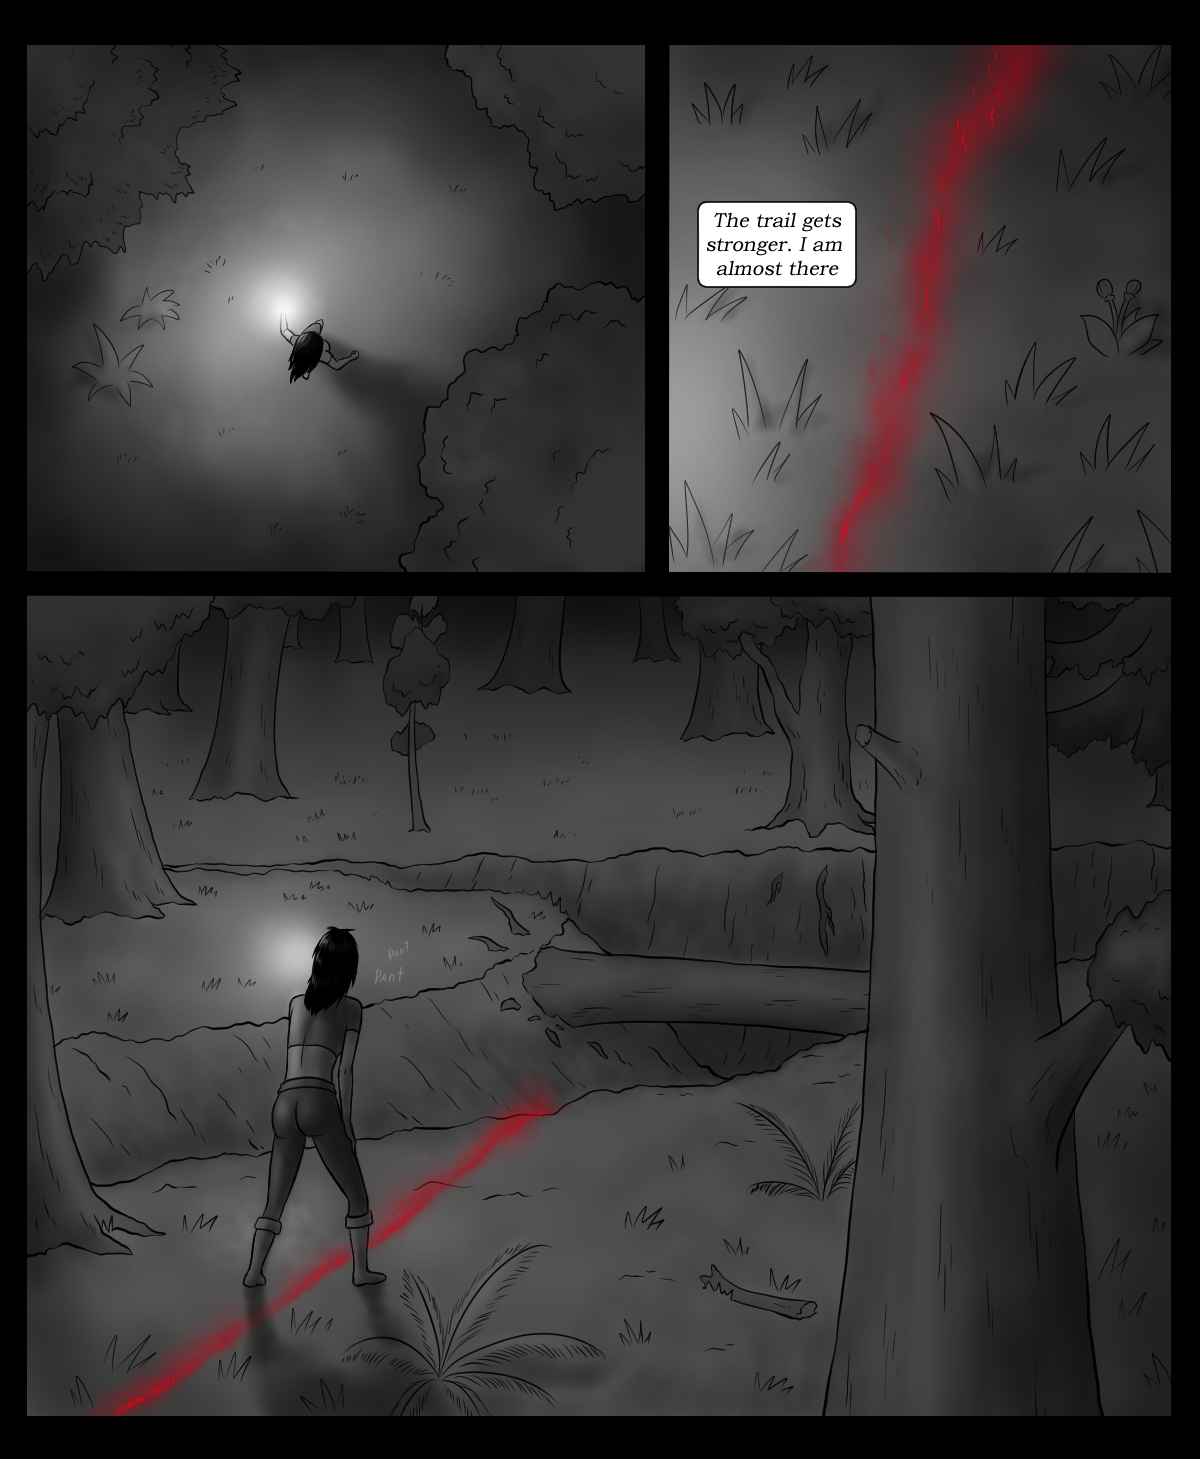 Page 50 - The path that leads down